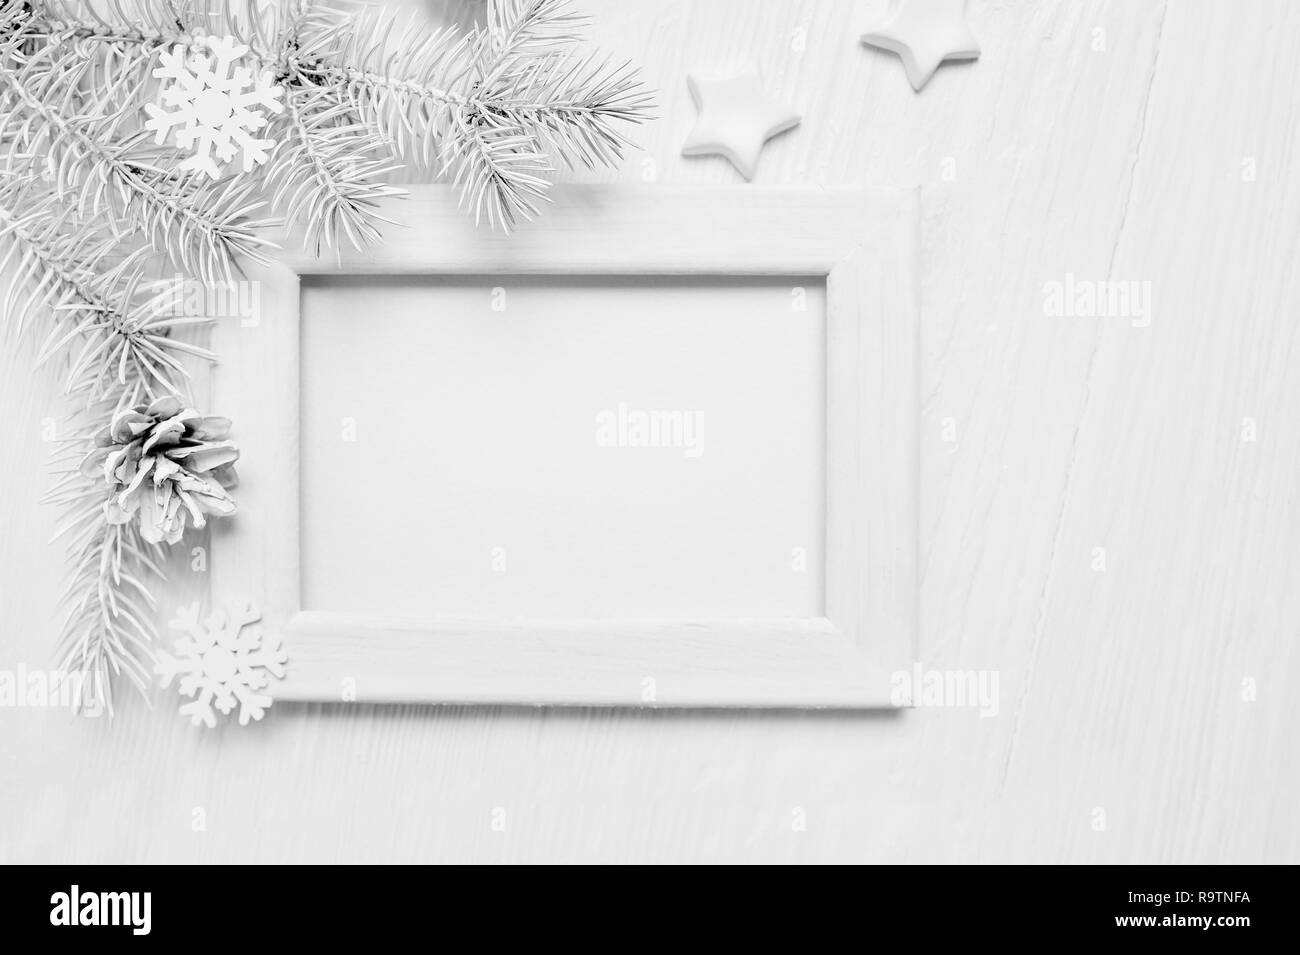 Mockup Christmas white tree wooden frame with place for your text, decorative stars, snowflakes and cone. Flat lay on a white wooden background. Top view Stock Photo